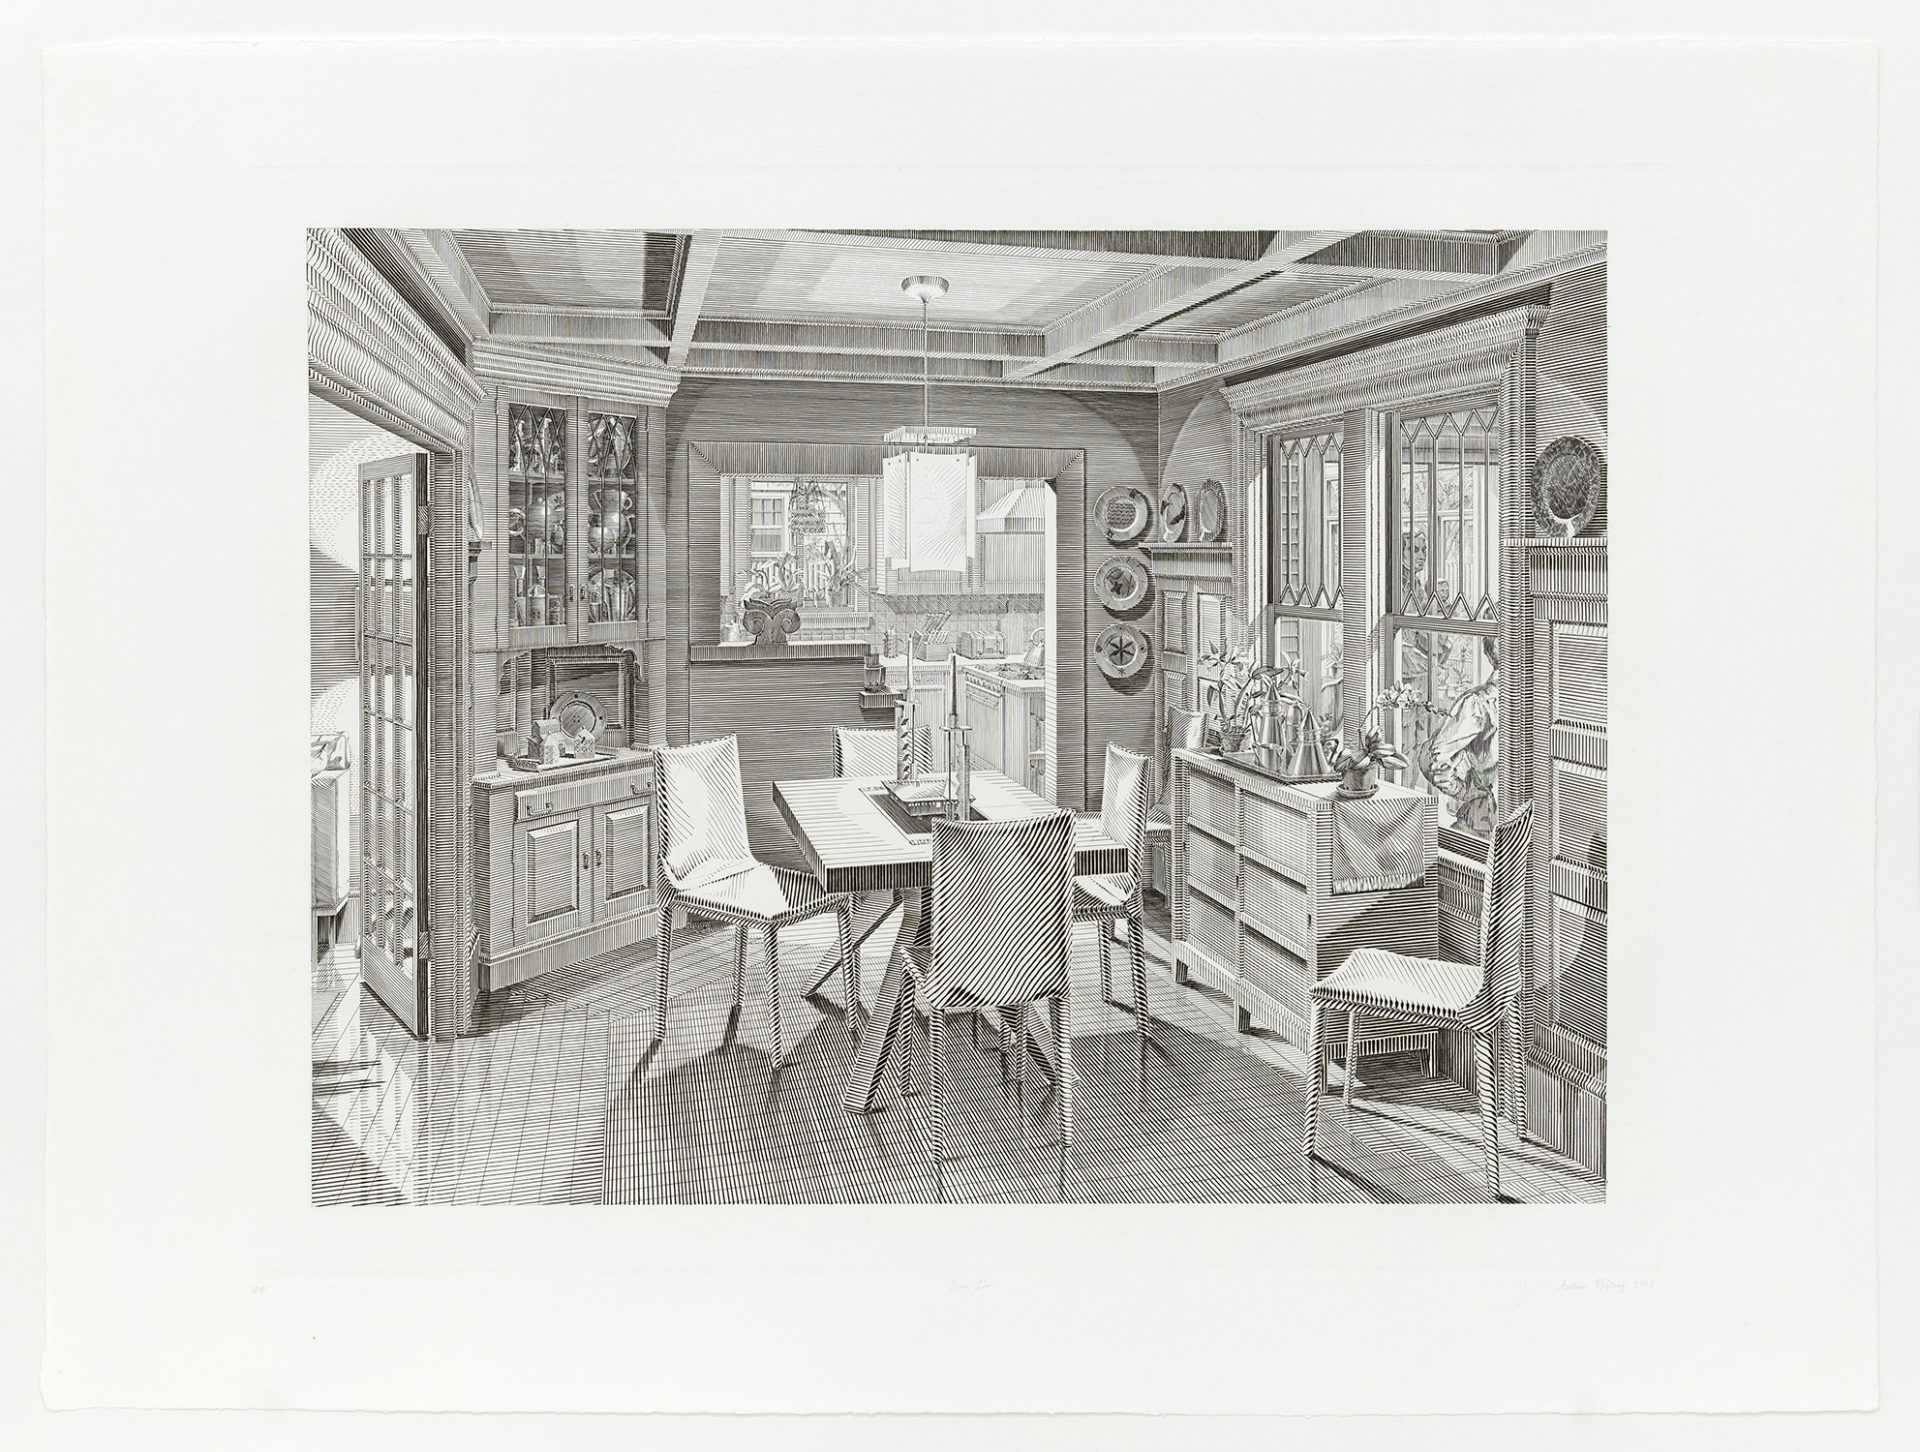 Open House: Five Engraved Scenes - Scene Two - Dining Room, 2008, Copperplate engraving, 22 x 30 inches (55.9 x 76.2 cm), Edition of 50